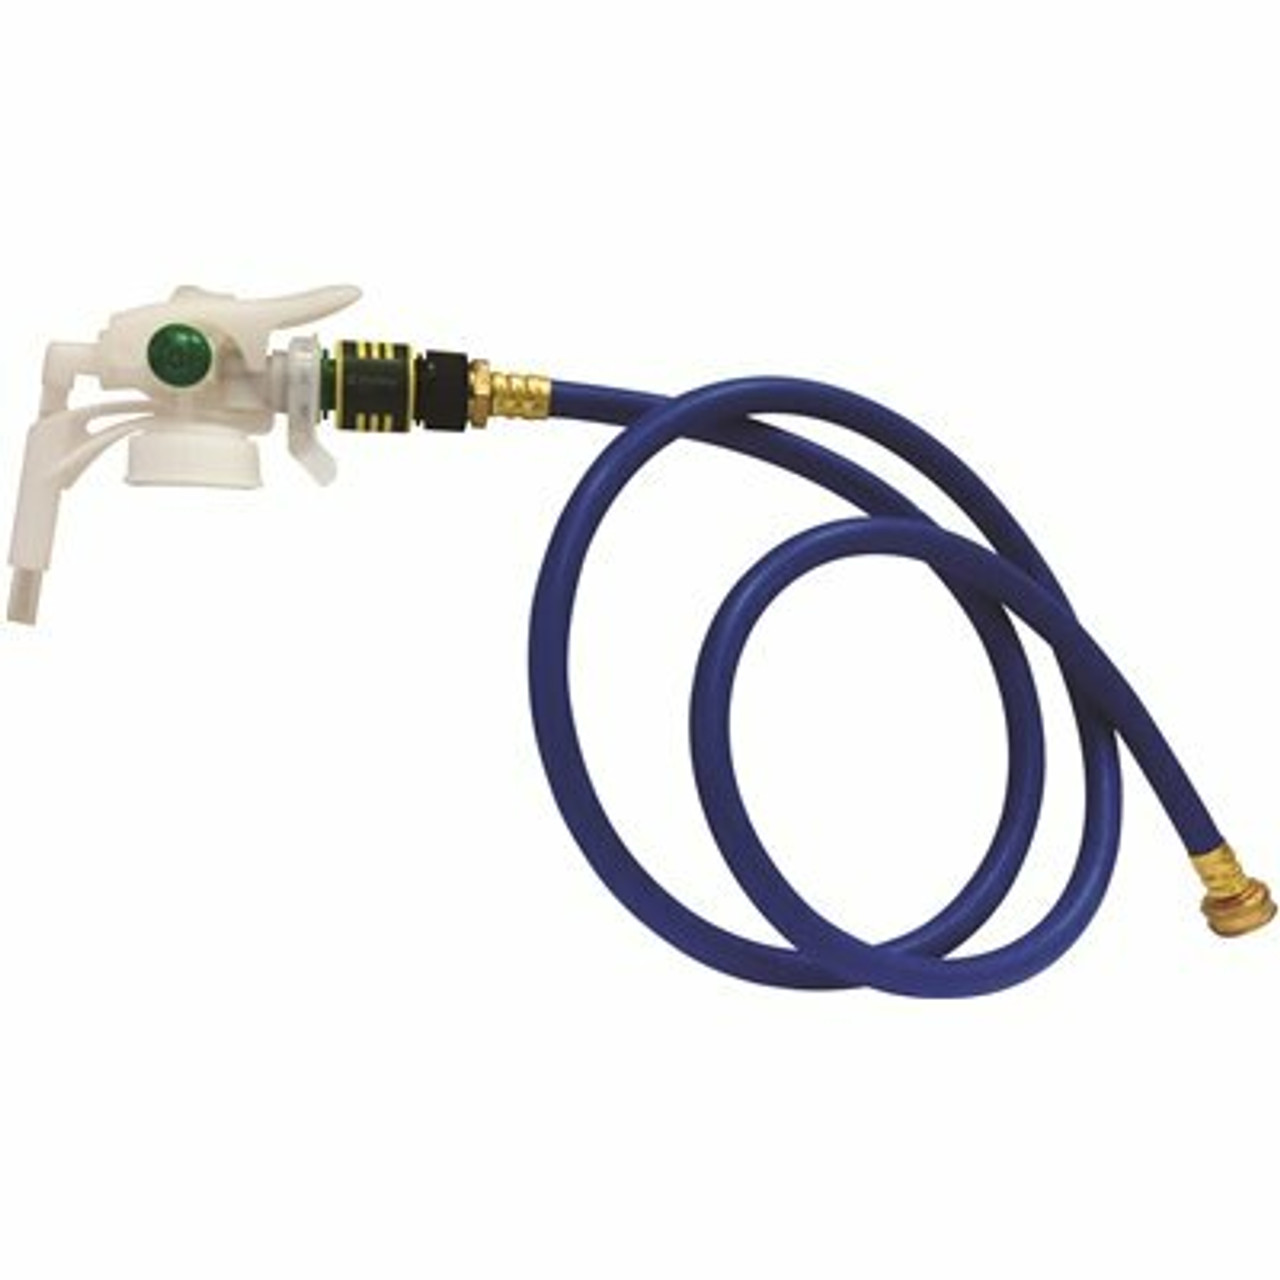 Greenlabs Pops Hose And Quick Connect